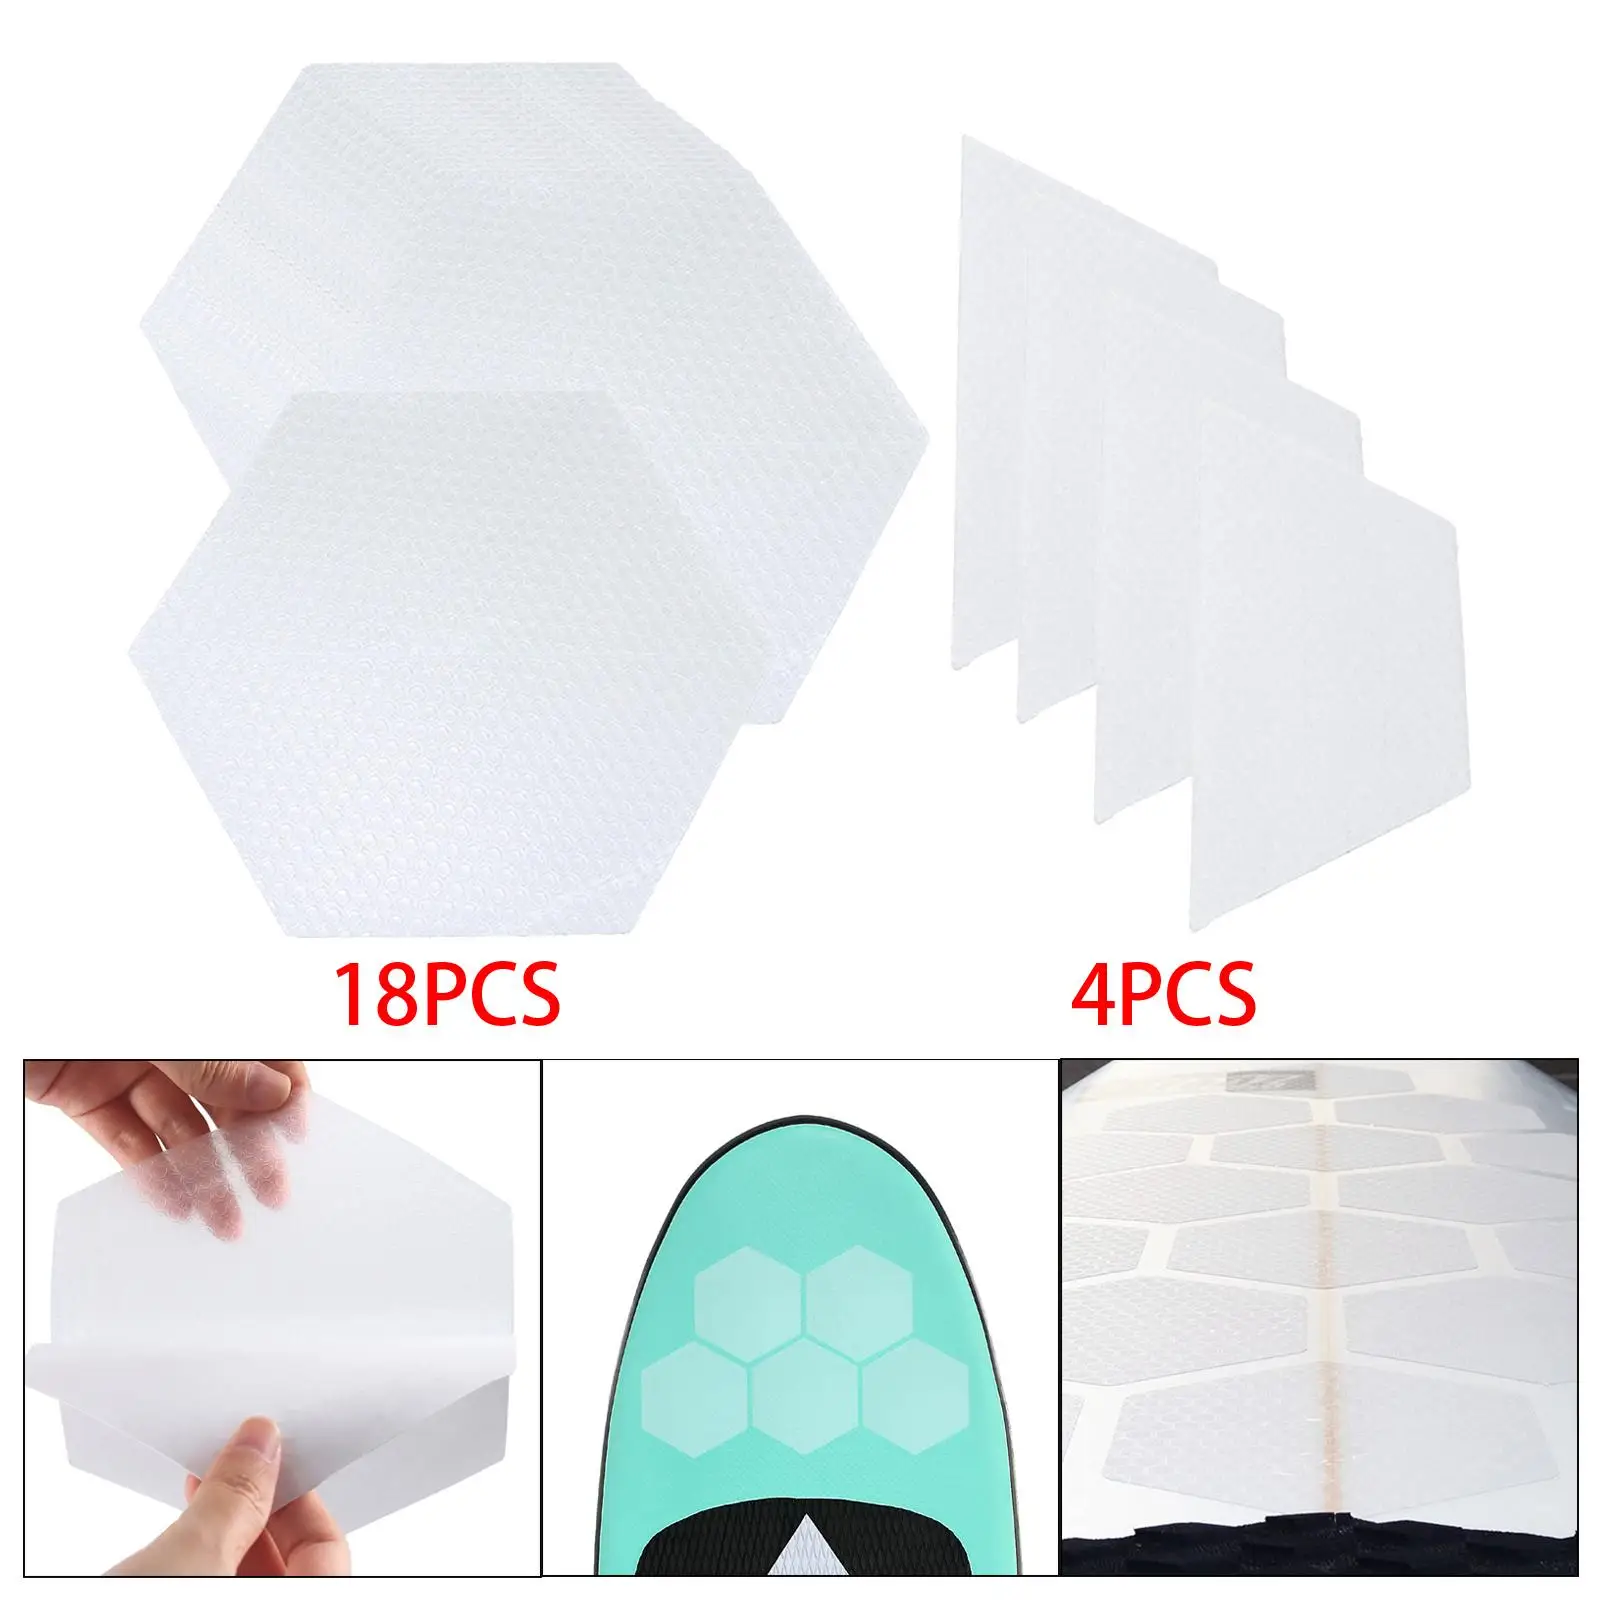 Surfboard Traction Pads,  Tape, Foot Strap Waxless Adhesive Surf Deck Pads,  Surfboard Short Long Board Surfing Accessories